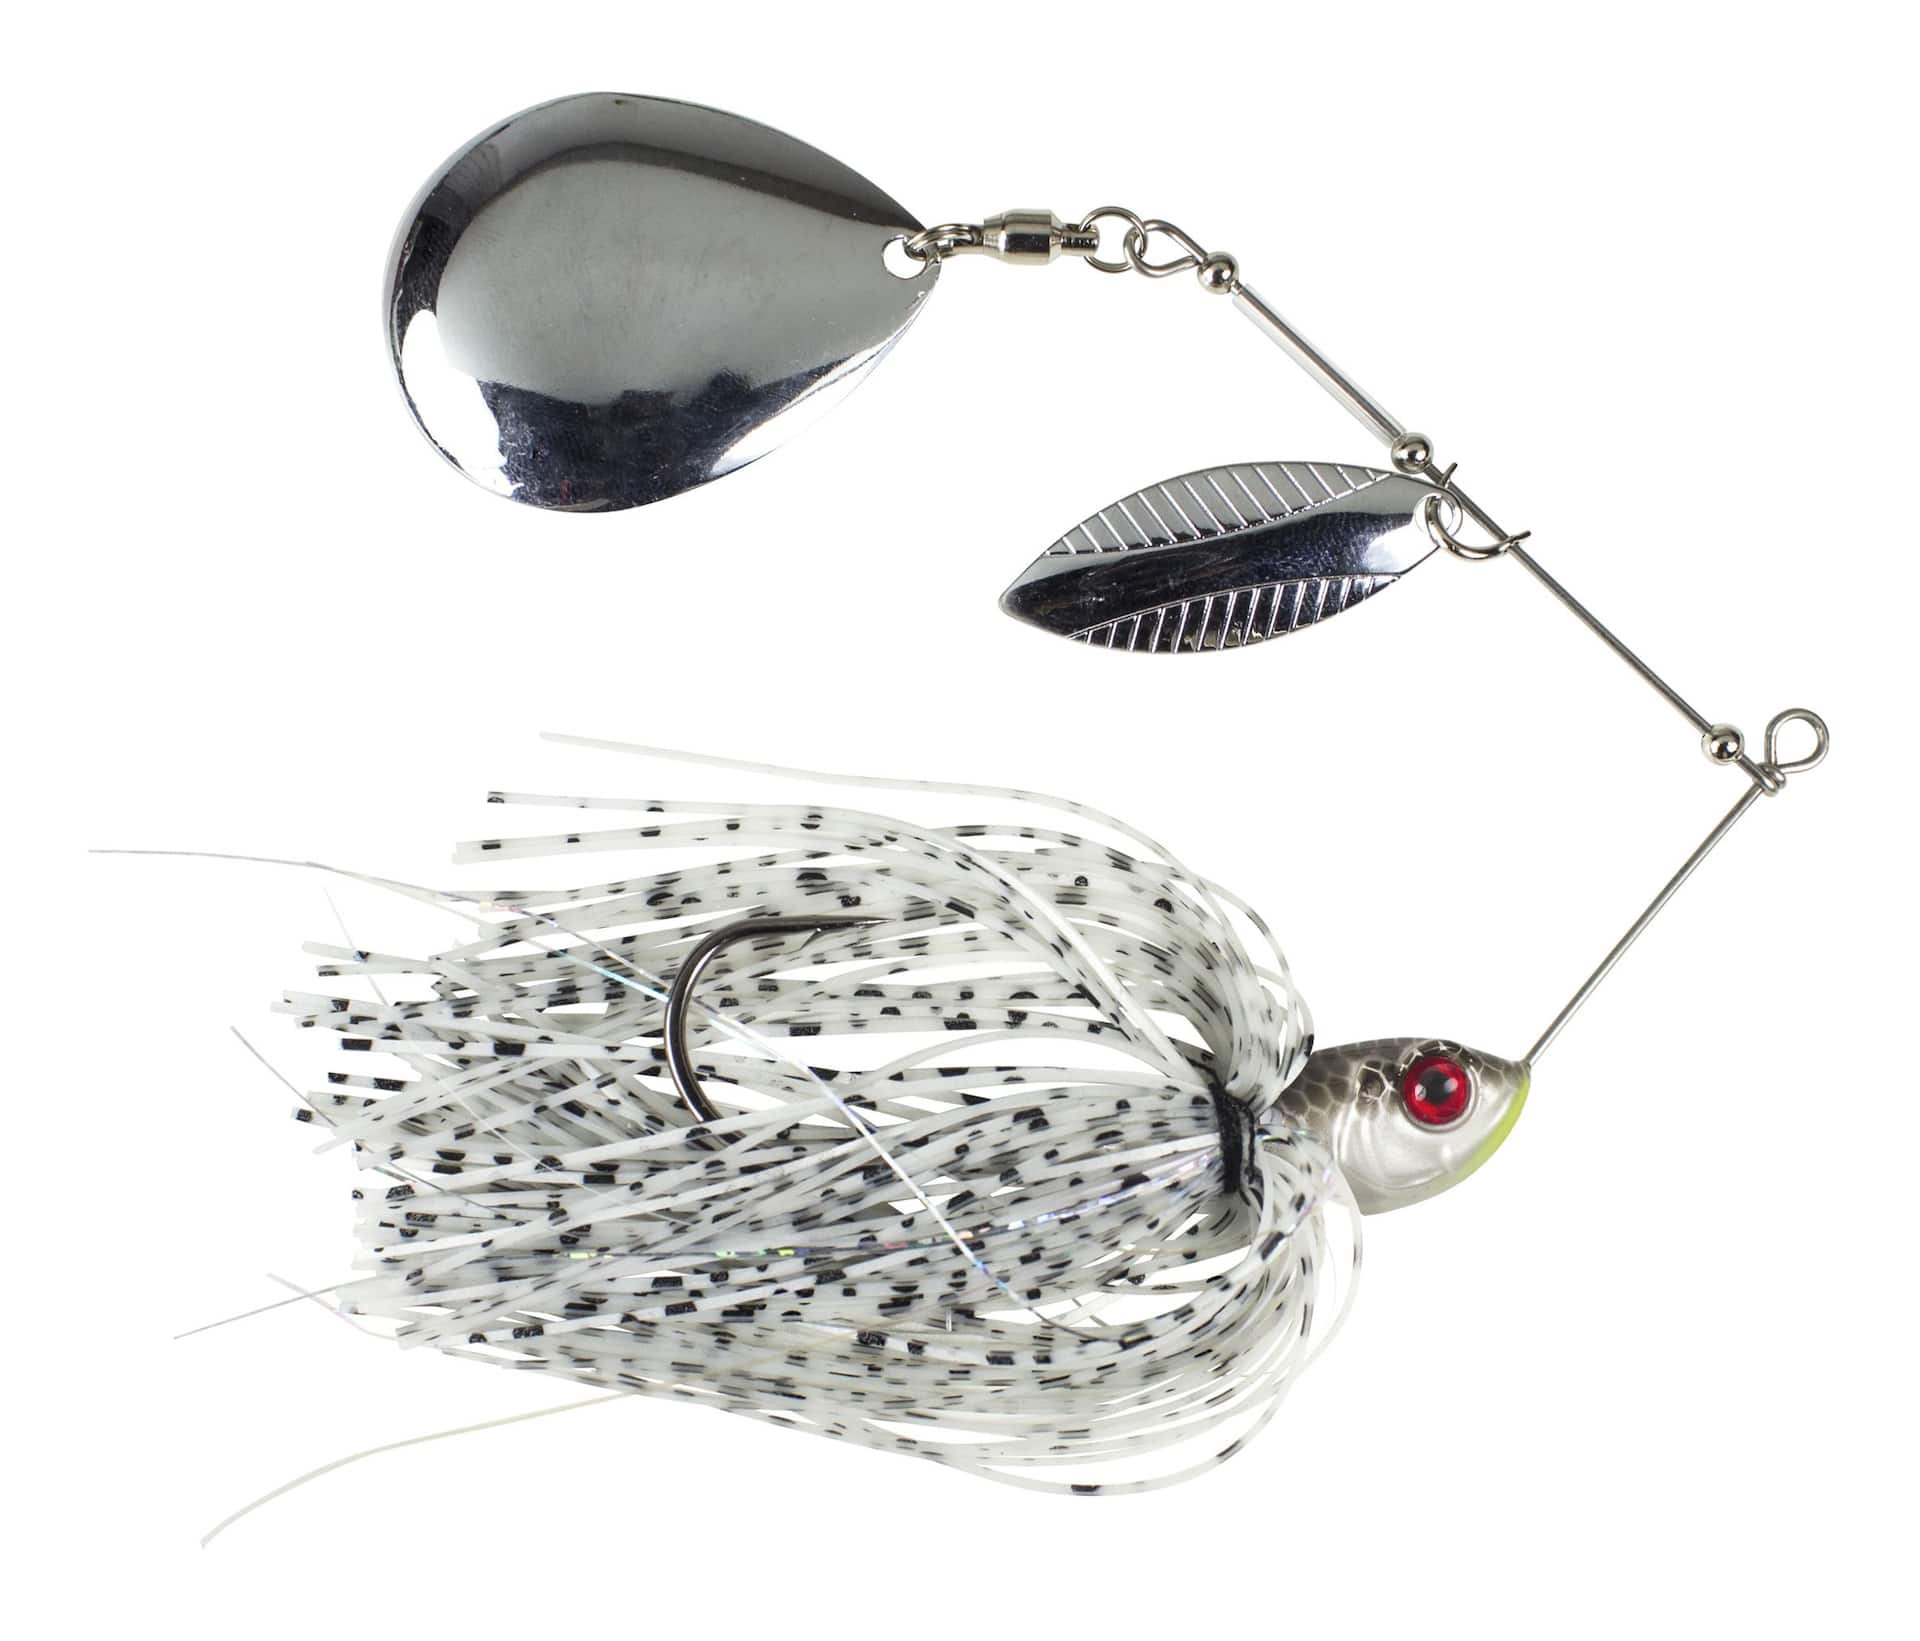 Excalibur Silver Fishing Lures